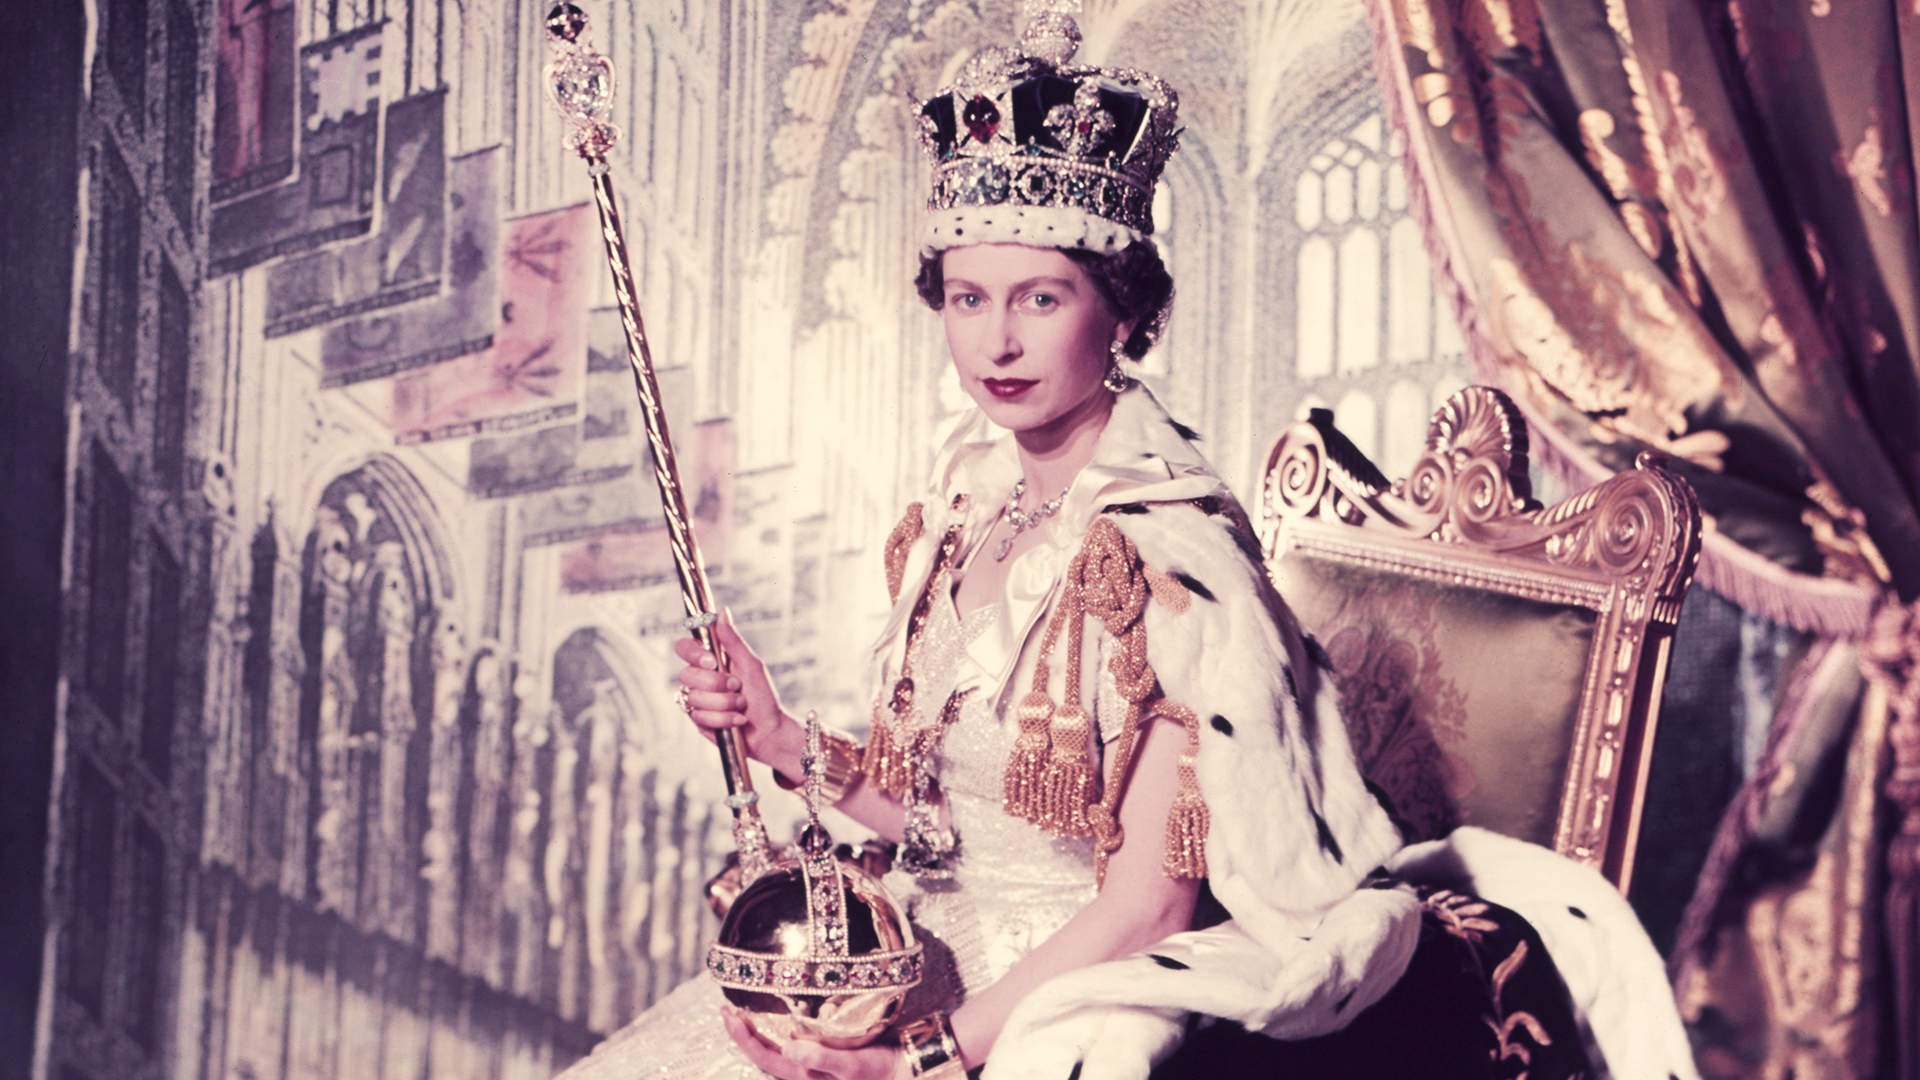 June 2, 1953 Queen Elizabeth II Was Crowned the Monarch of the United